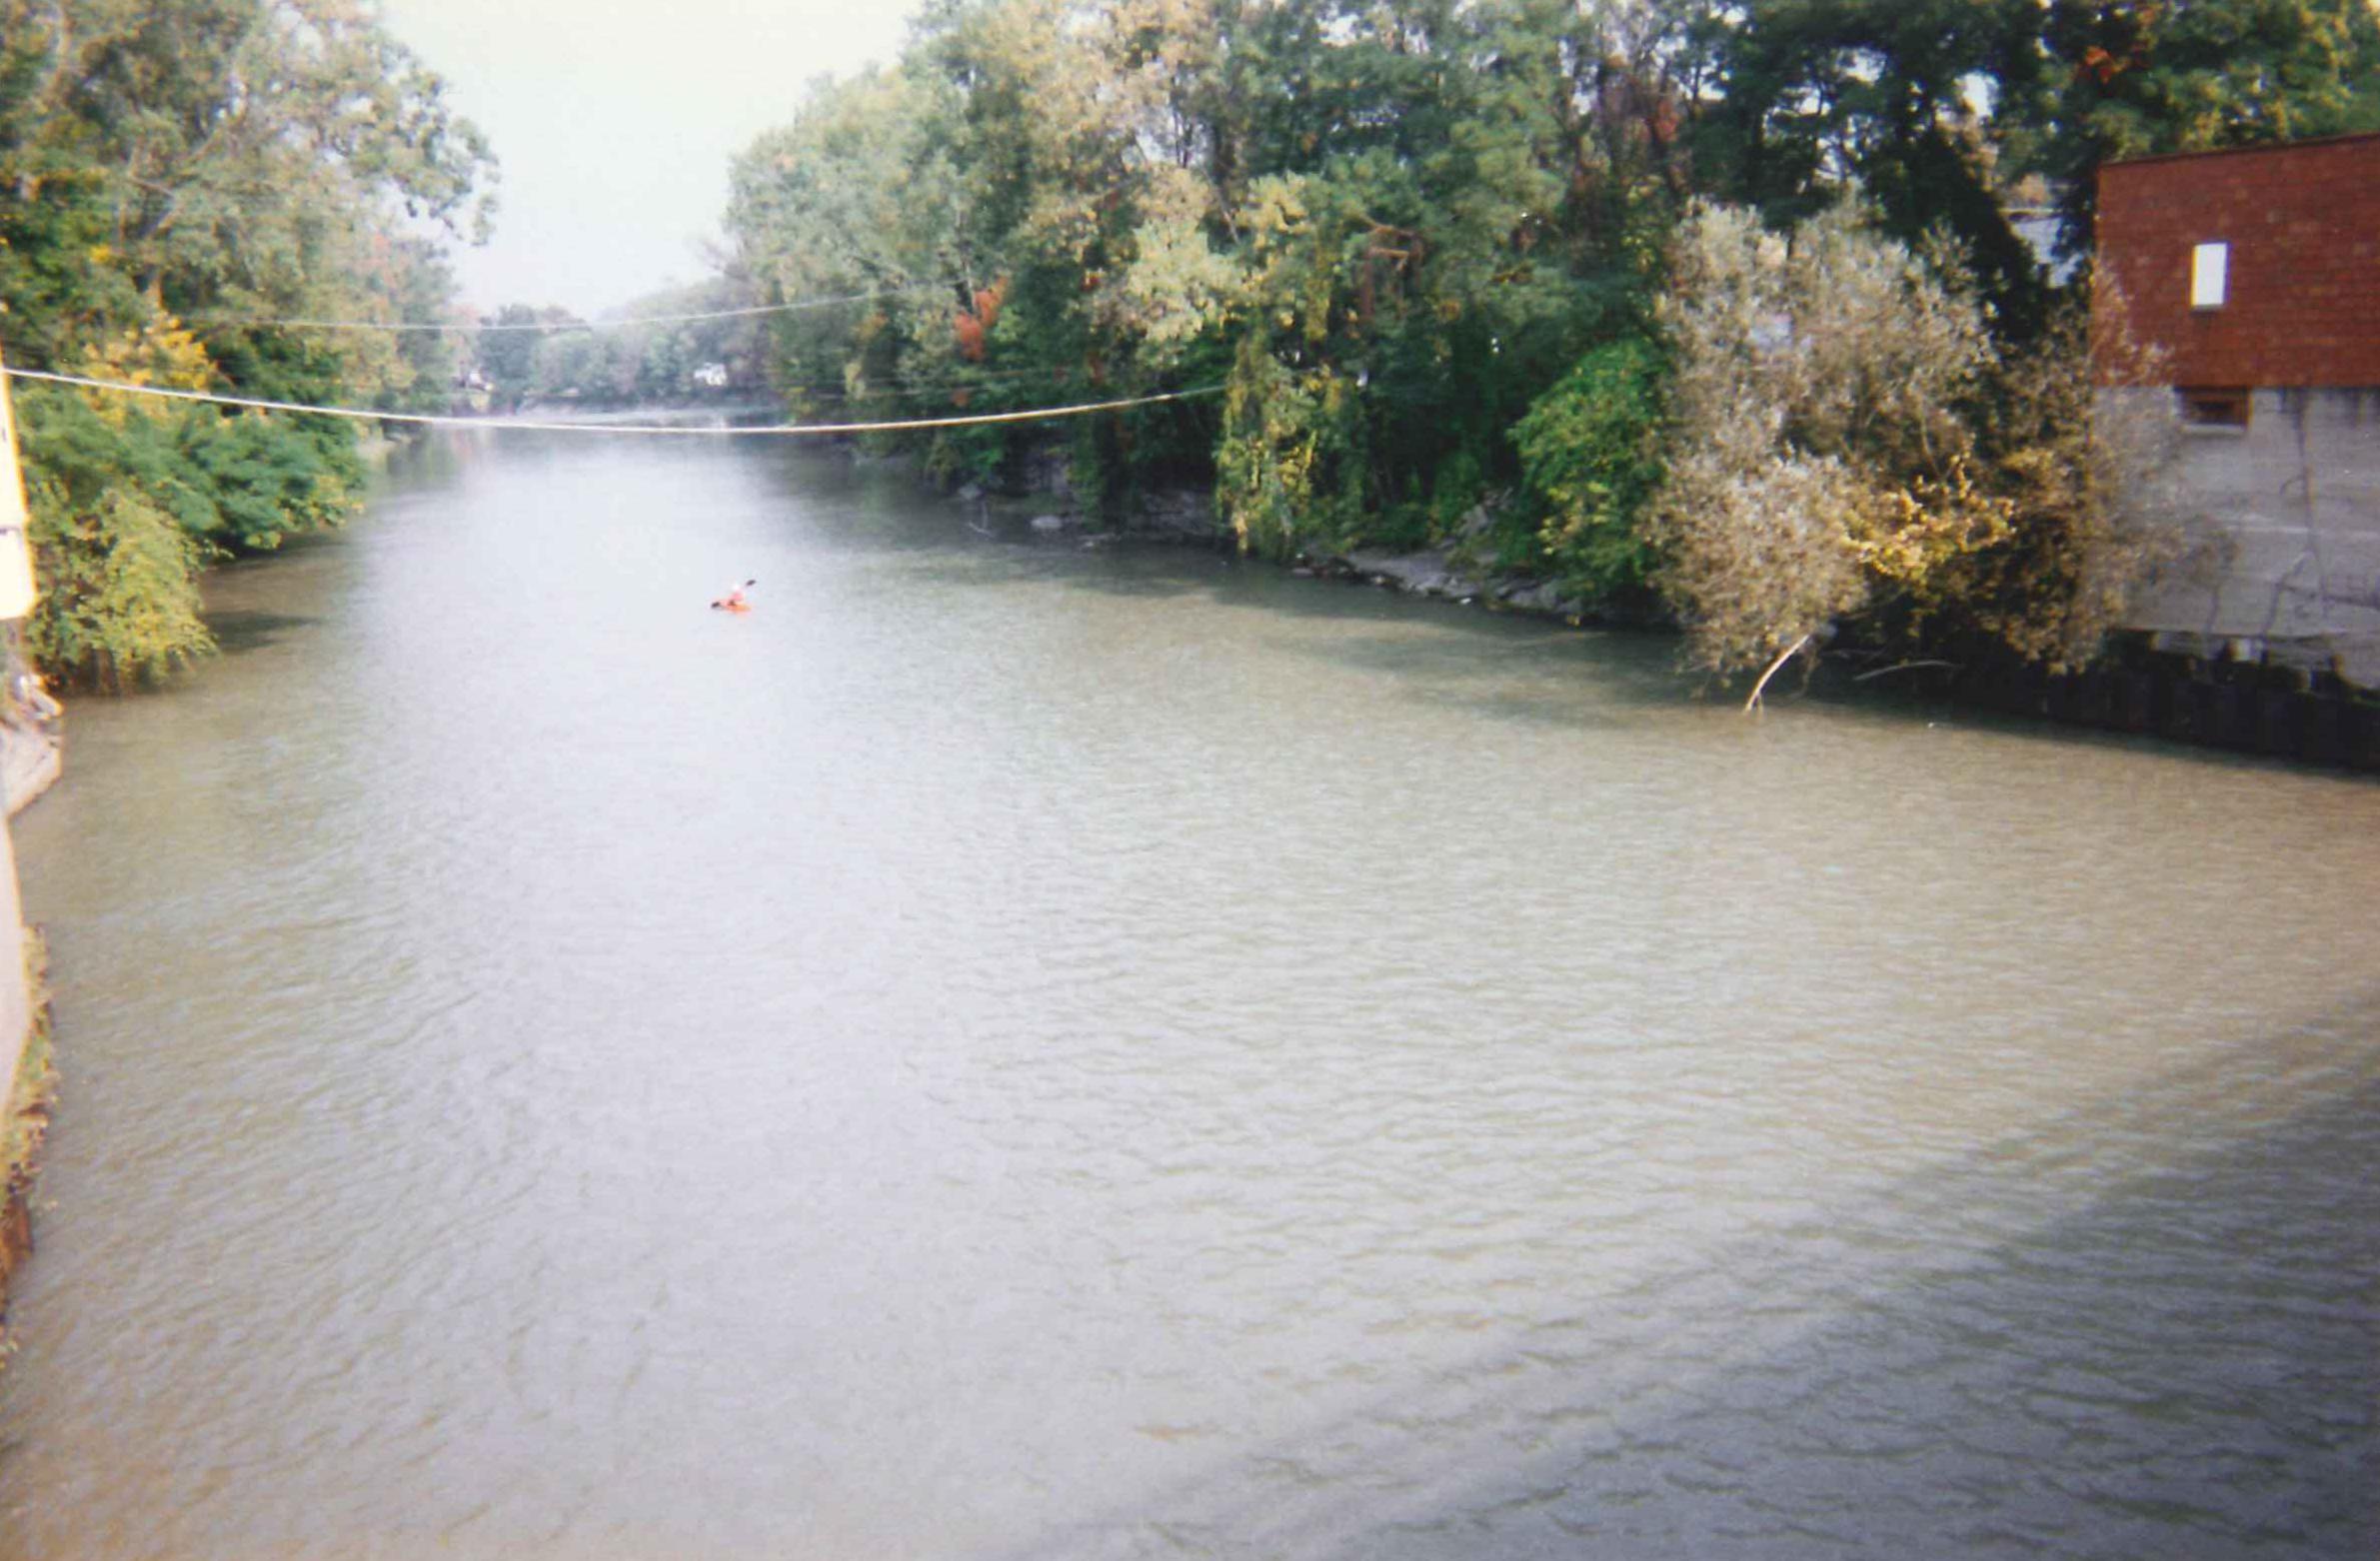 Photograph of the Cattaraugus Creek at Gowanda, NY (GOWN6) looking downstream